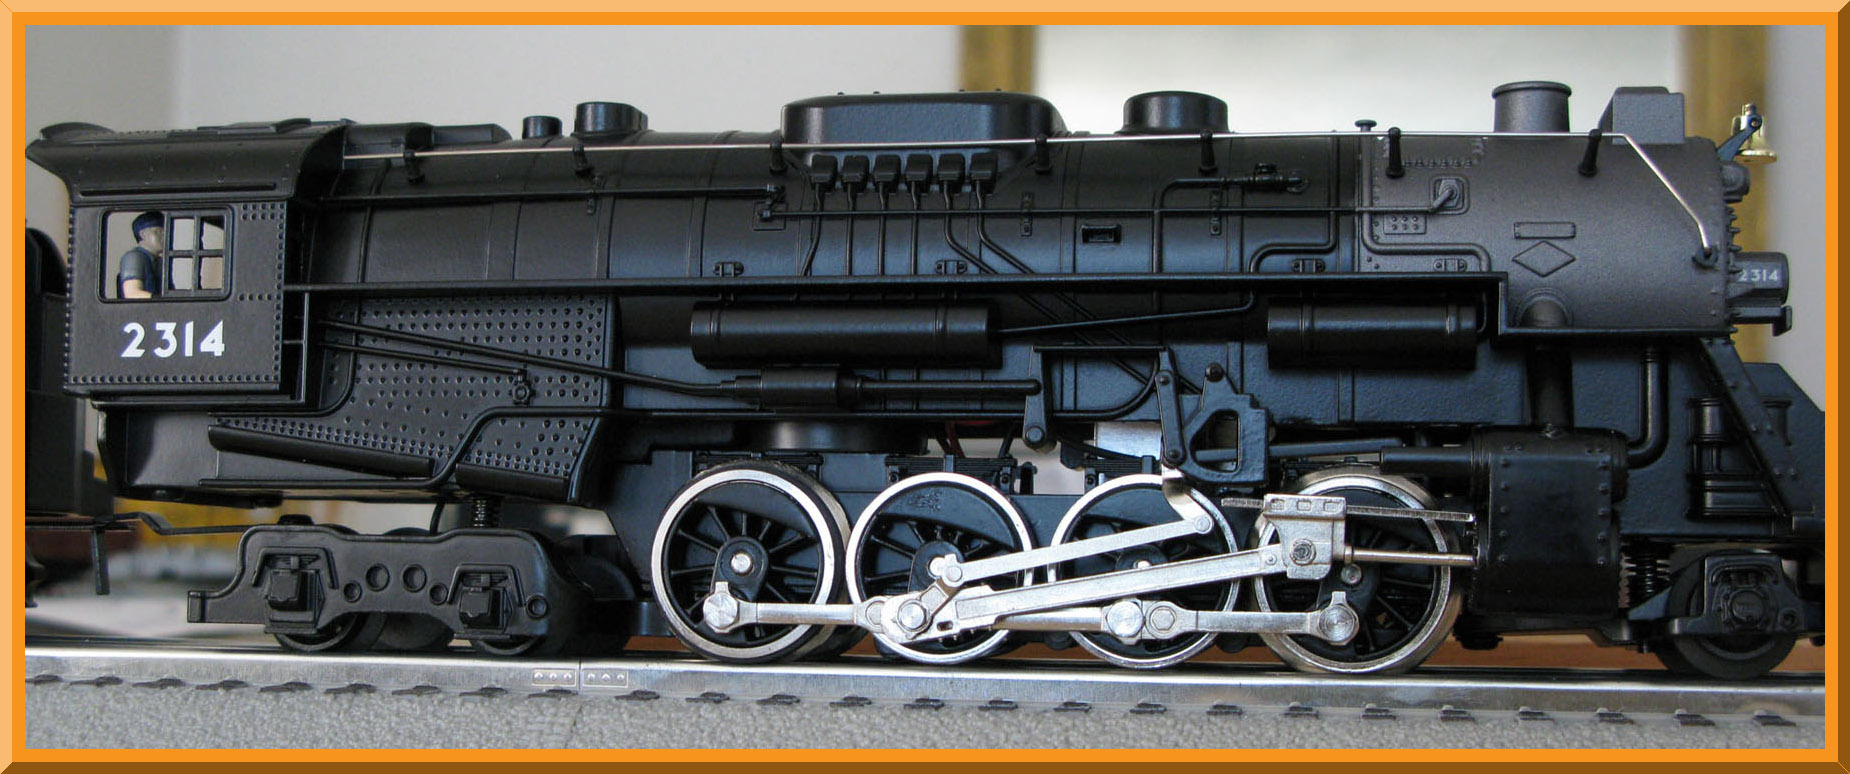 What are some models of Lionel engines?